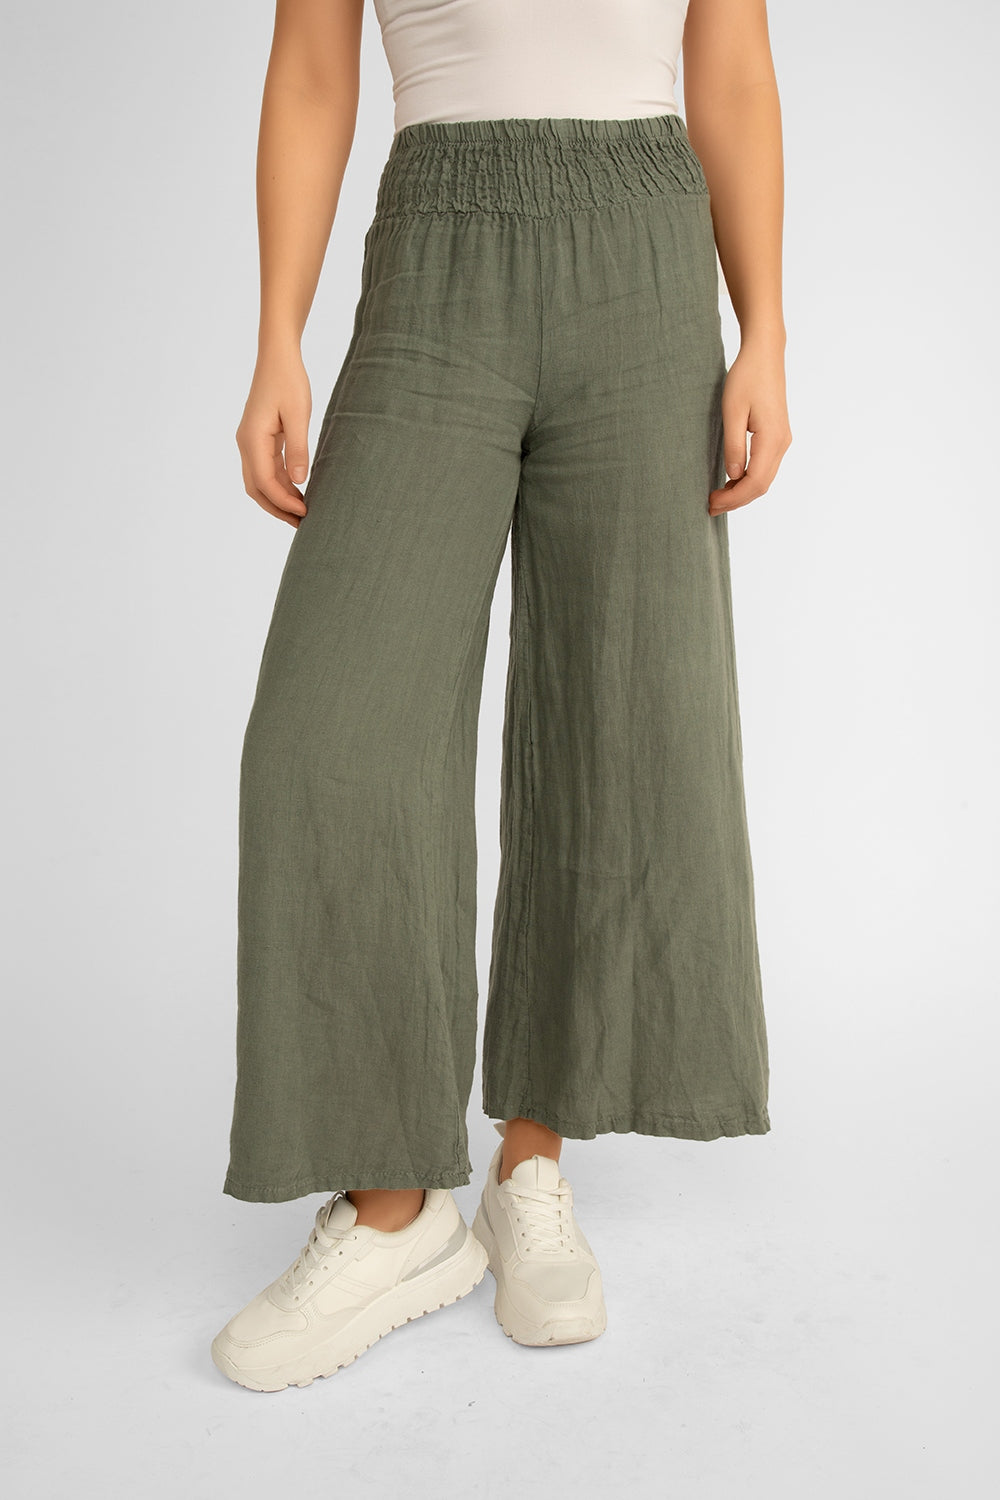 Me & Gee (19-801) Women's Pull-on Wide Leg Smocked Waist Linen Pants in Military Green